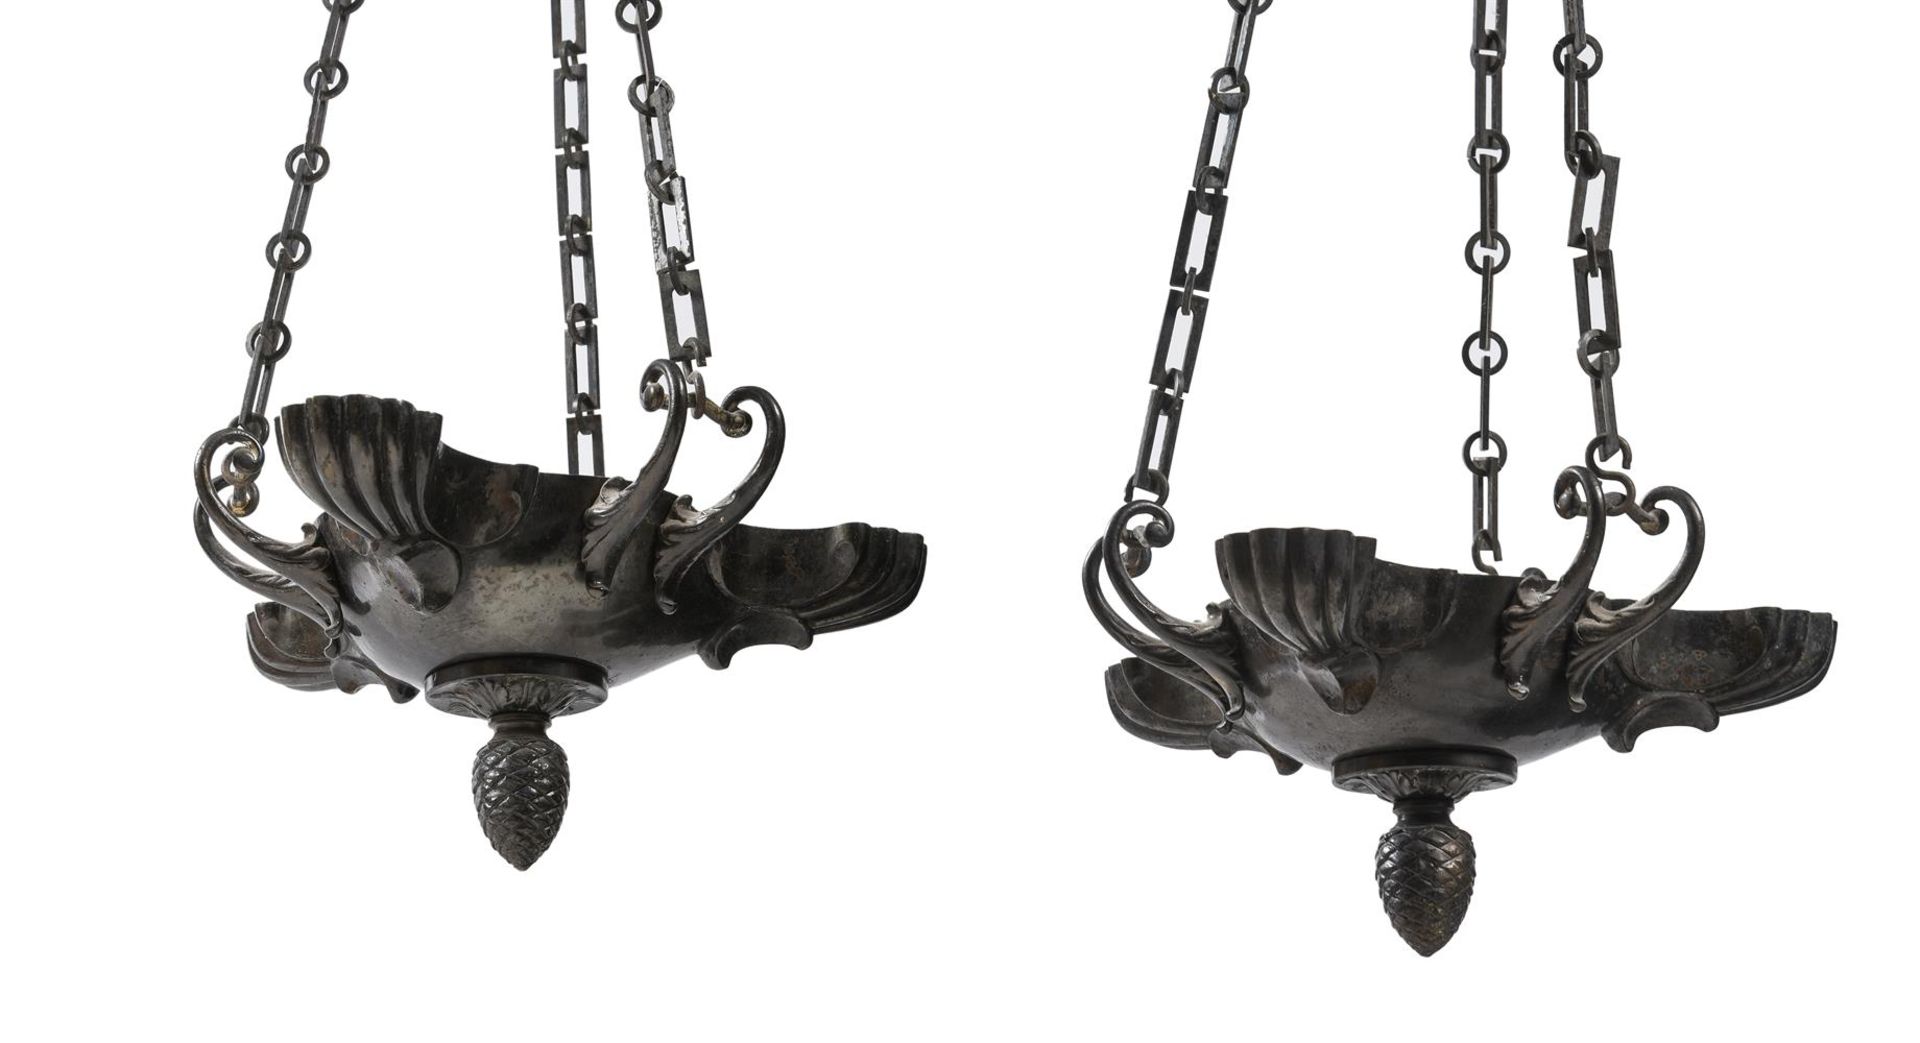 A PAIR OF WILLIAM IV COLZA HANGING LIGHTS, CIRCA 1830-1840